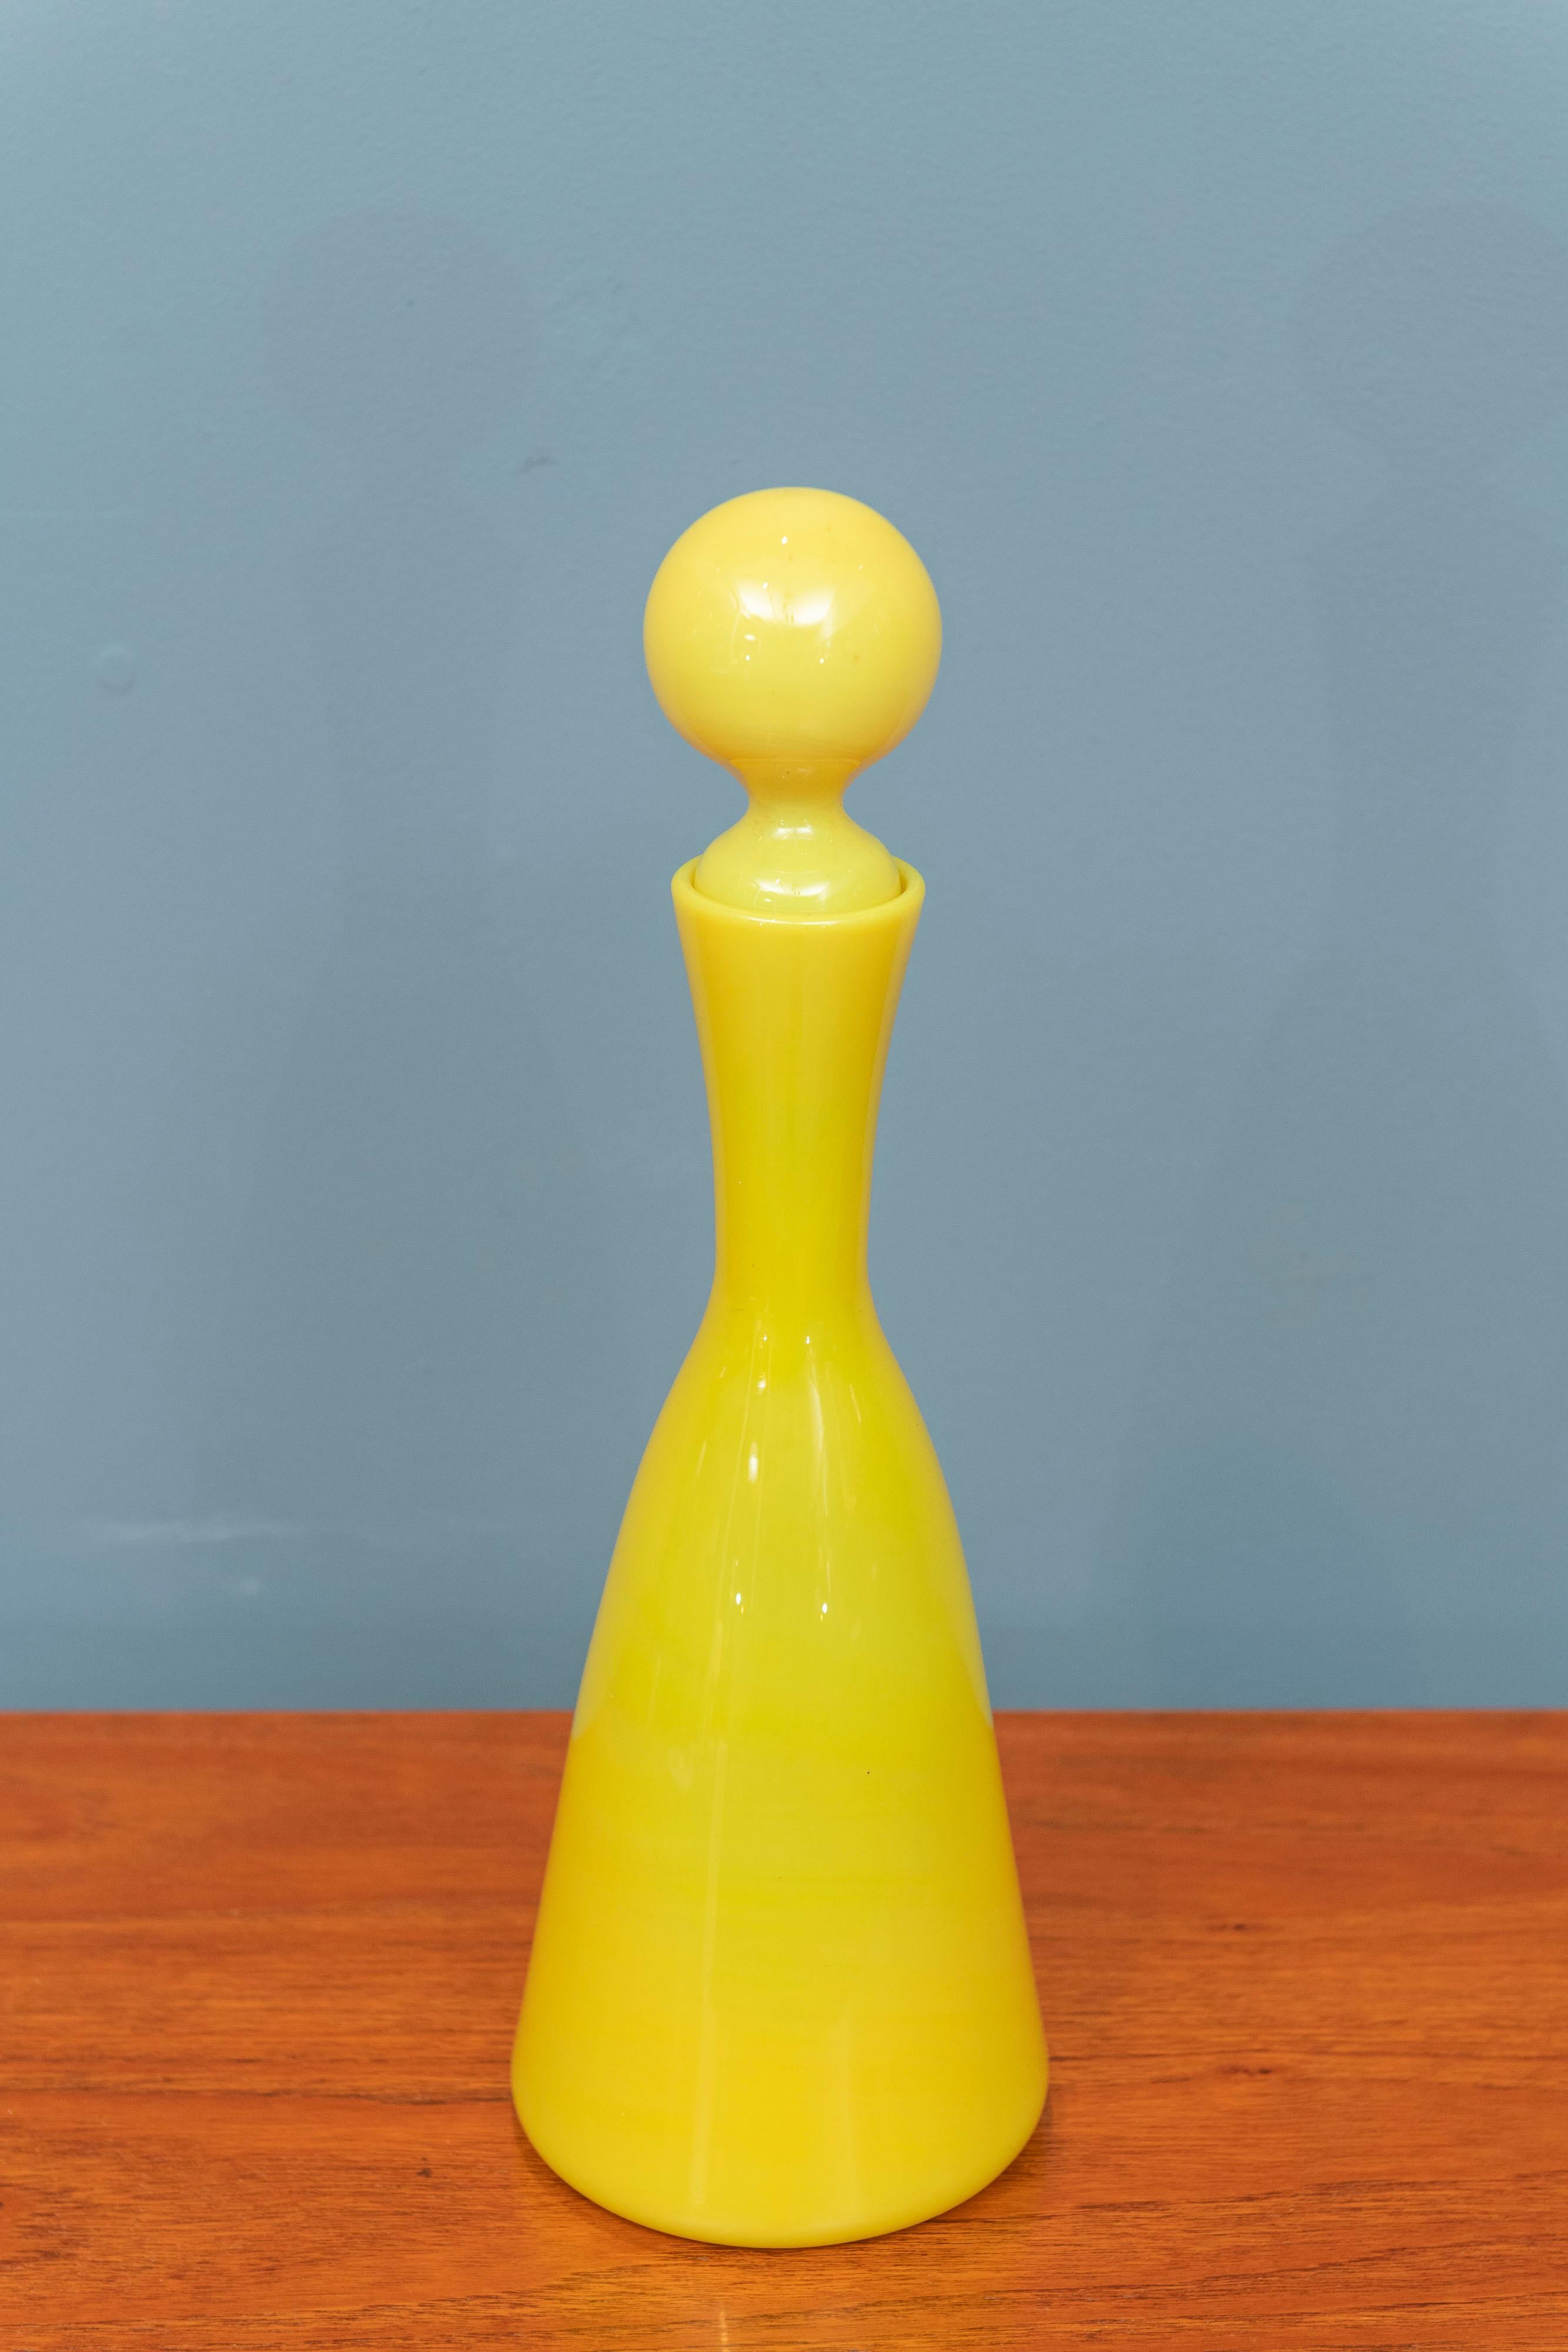 Empoli yellow glass decanter, Italy. Gorgeous and vibrant transparent lemon yellow blown glass decanter or bottle with matching stopper. Rare color and form for decoration or liquor.